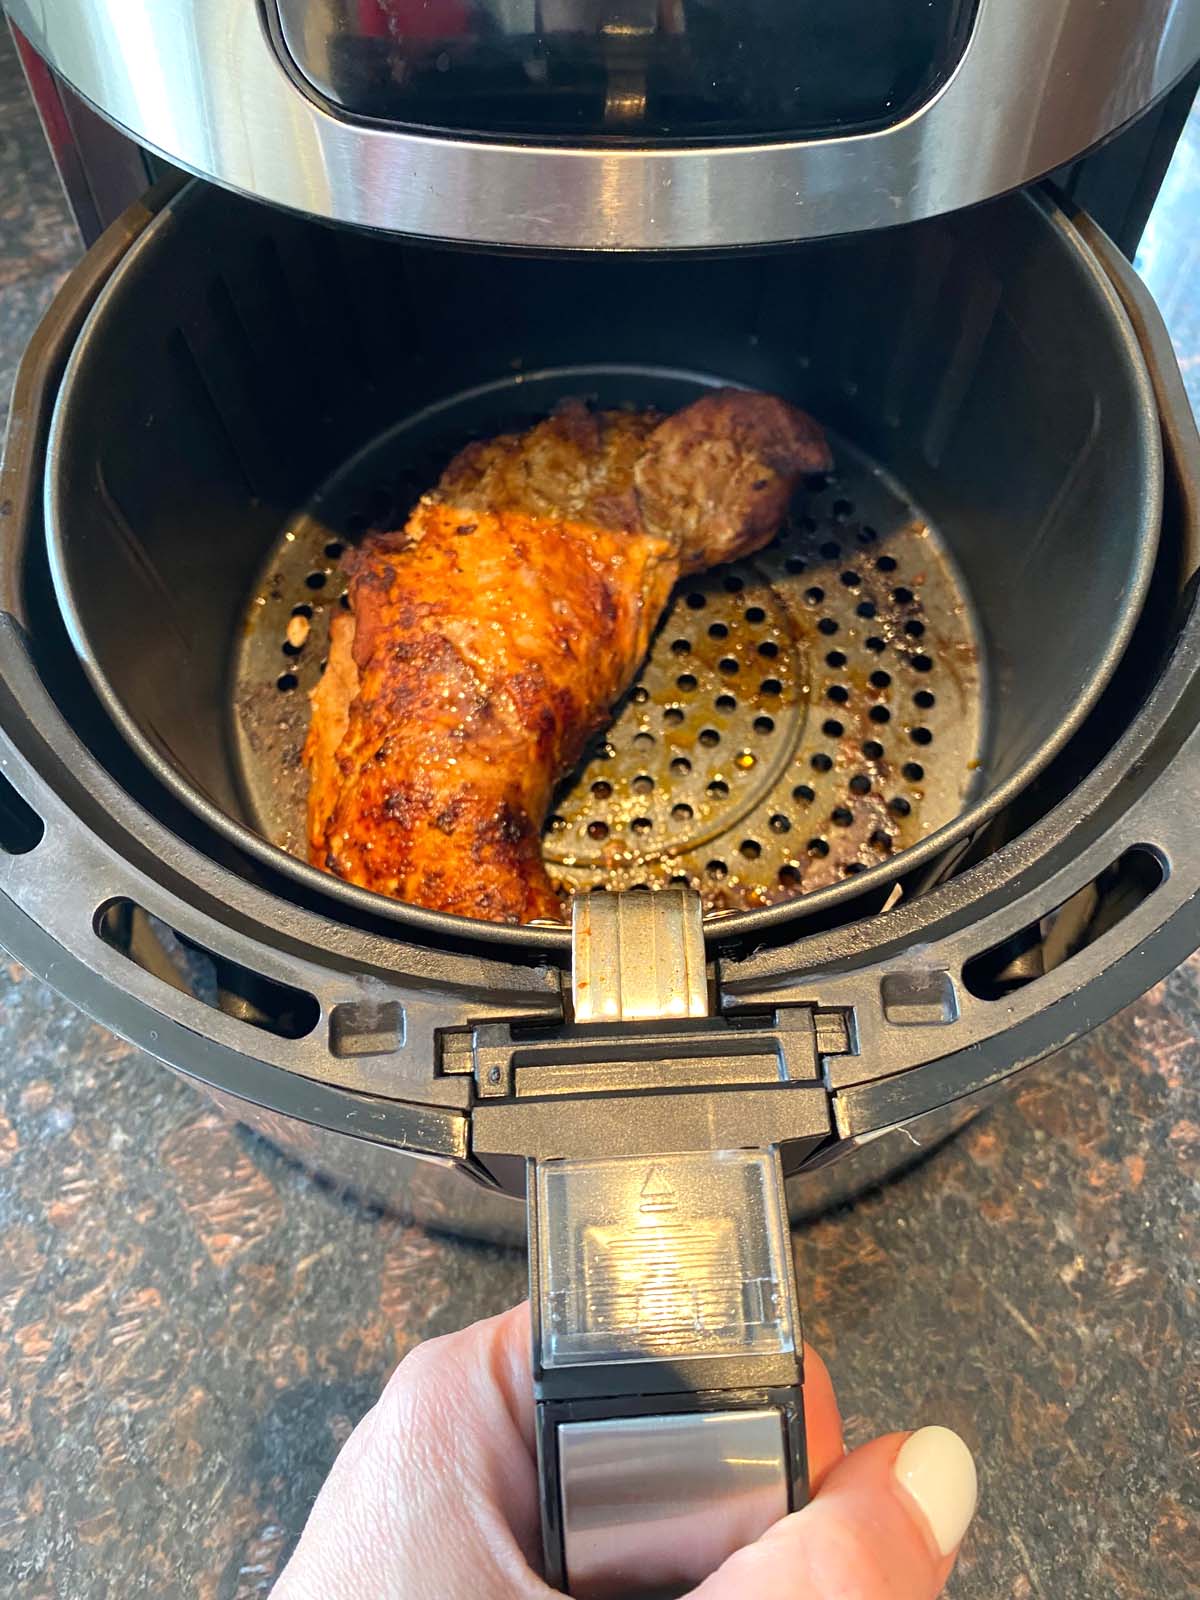 Hand removing basket from air fryer to show meat cooked with browning on top.